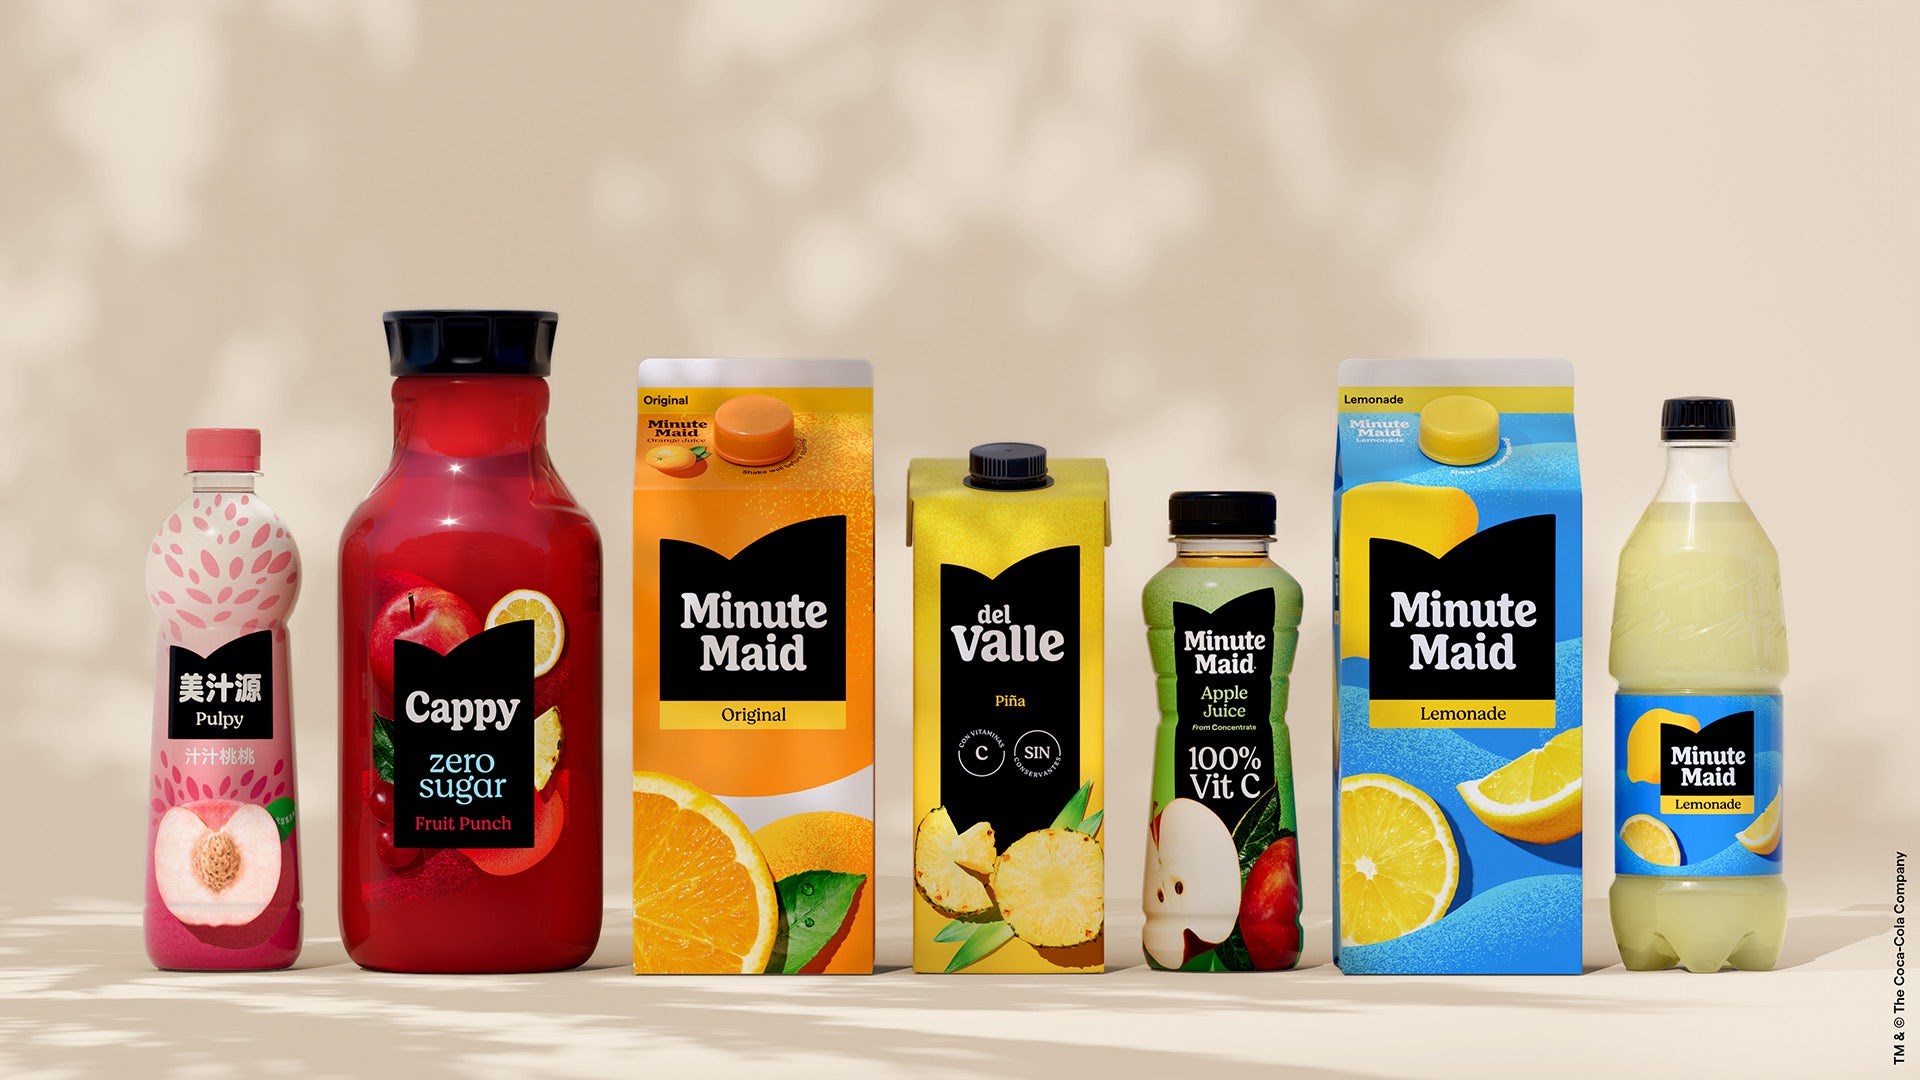 Image showing the new Minute Maid branding and packaging on a line-up of six different drinks products